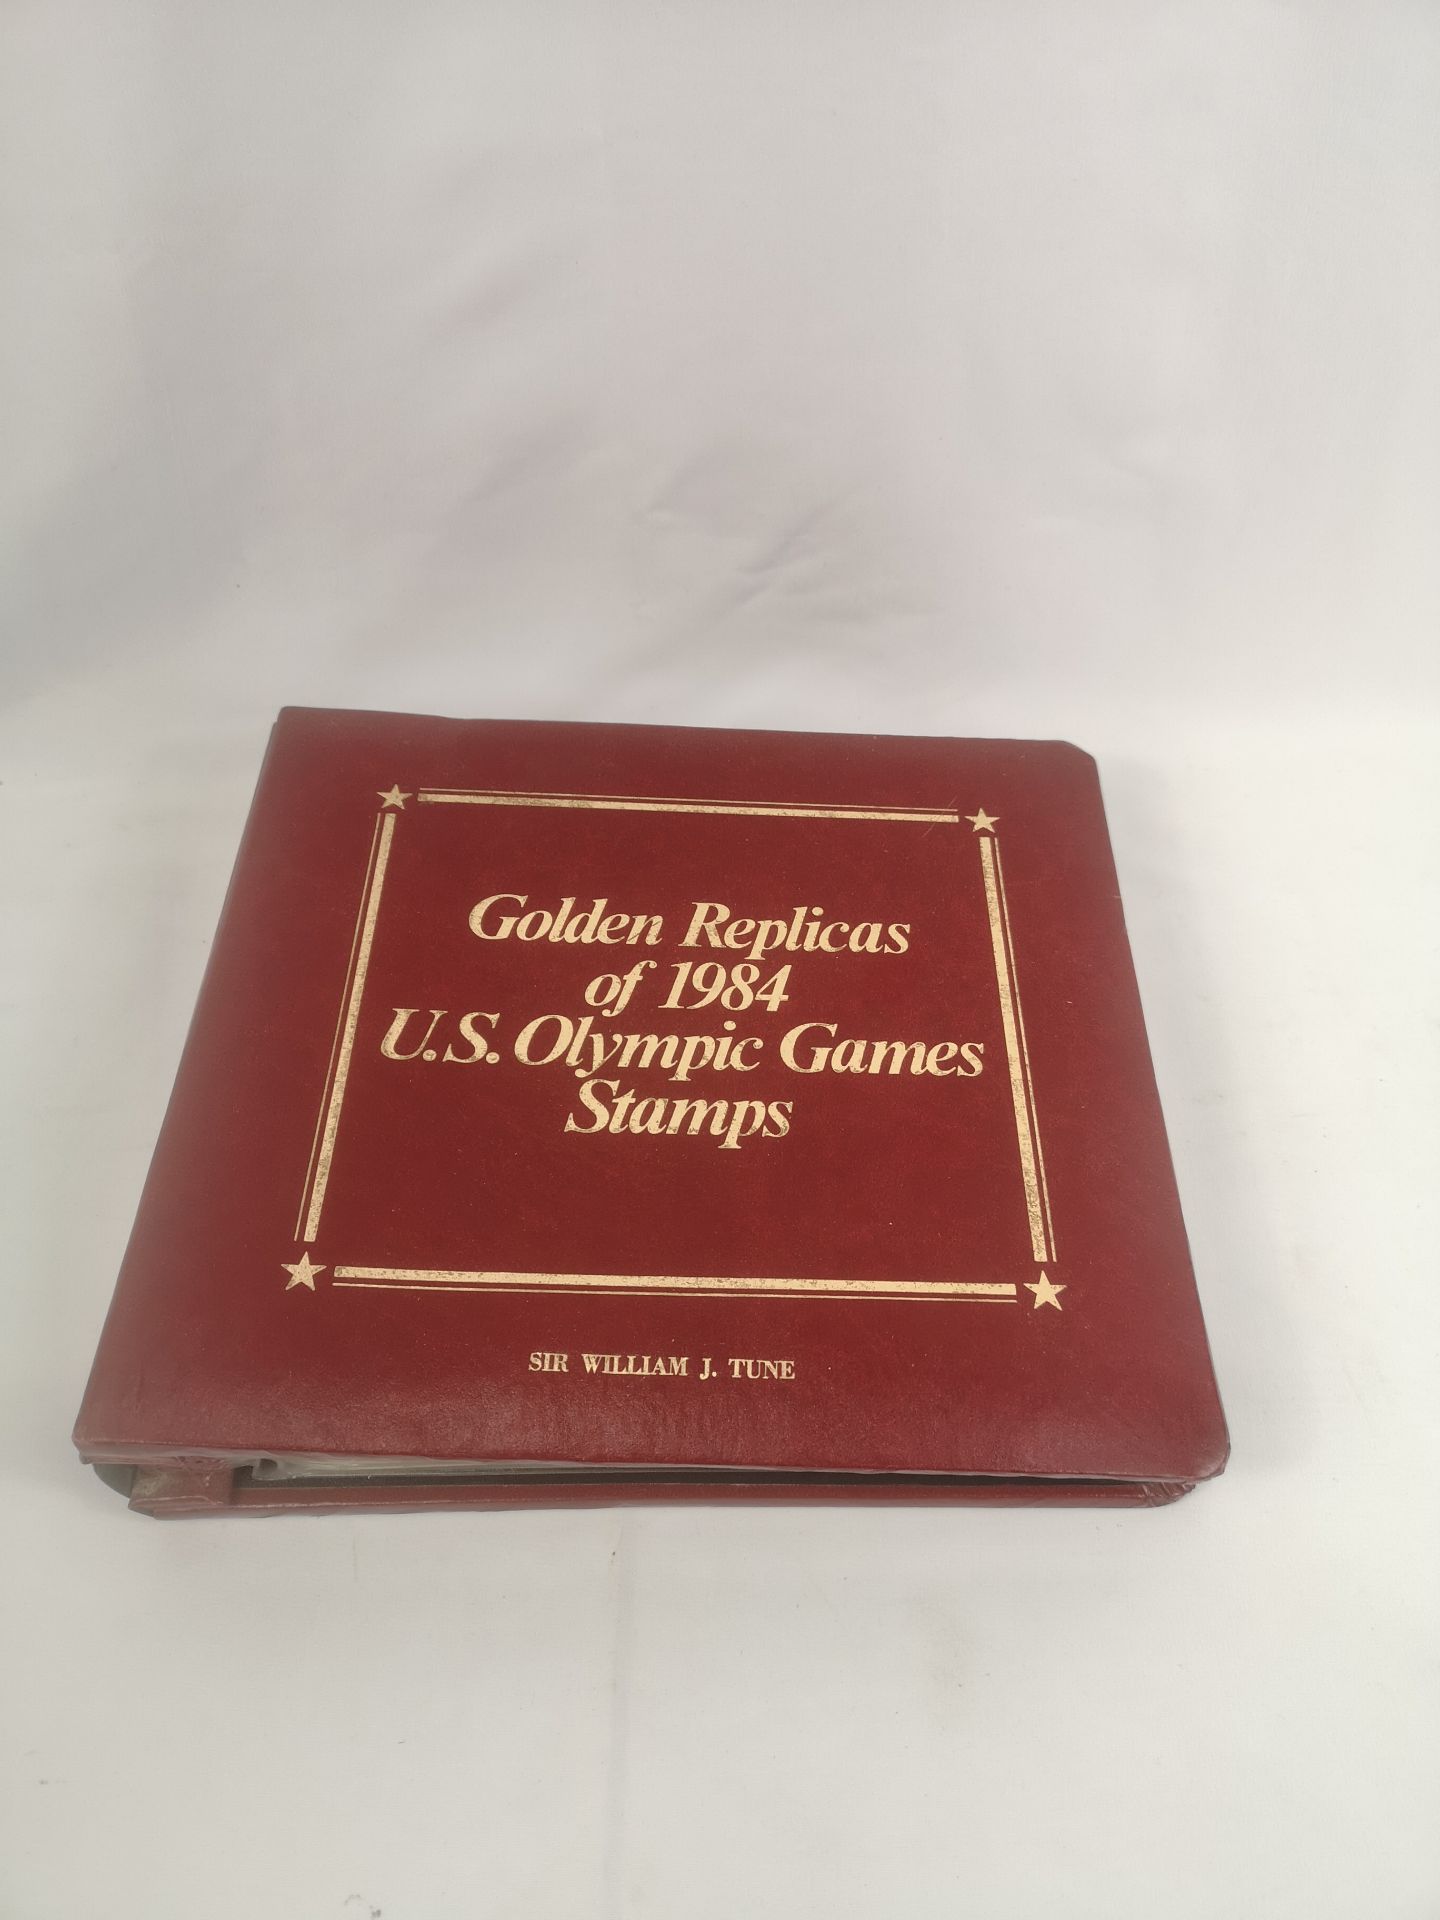 An album containing 'Golden Replicas of 1984 U.S. Olympic Games Stamps.